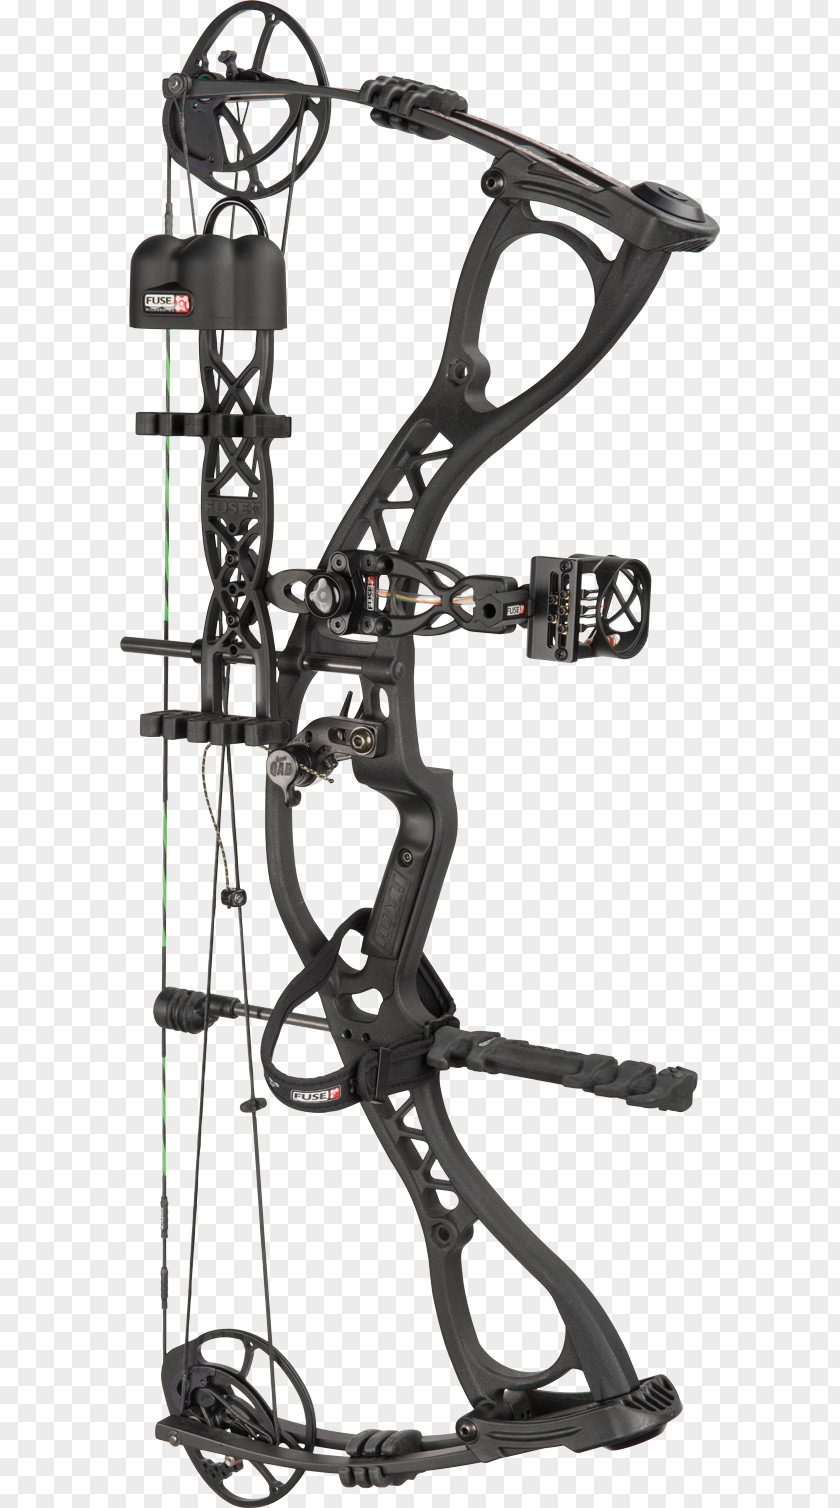 Bow Compound Bows Archery Recurve And Arrow PNG